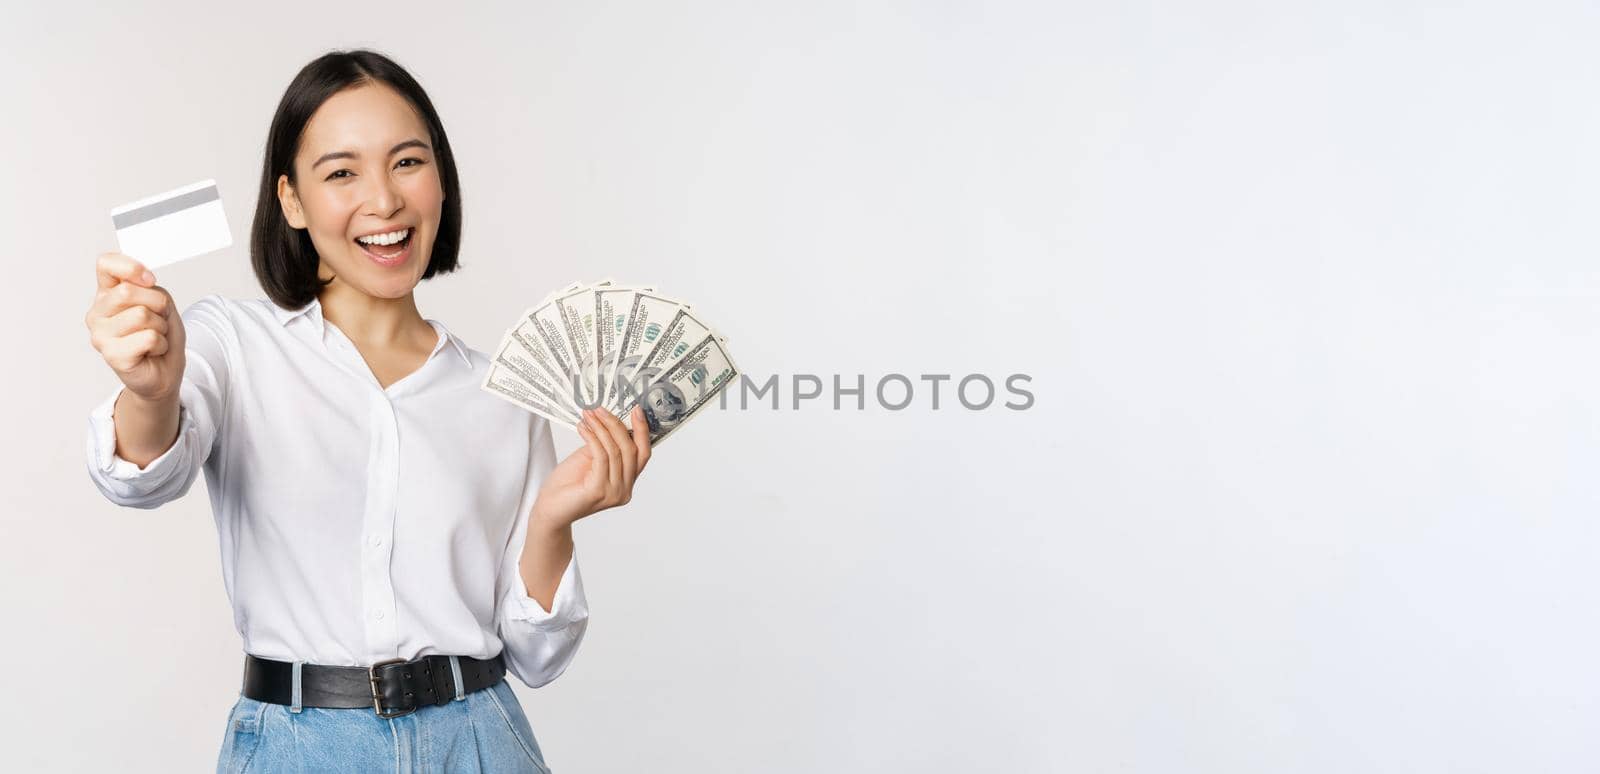 Happy korean woman holding credit card and money dollars, smiling and laughing, posing against white studio background.